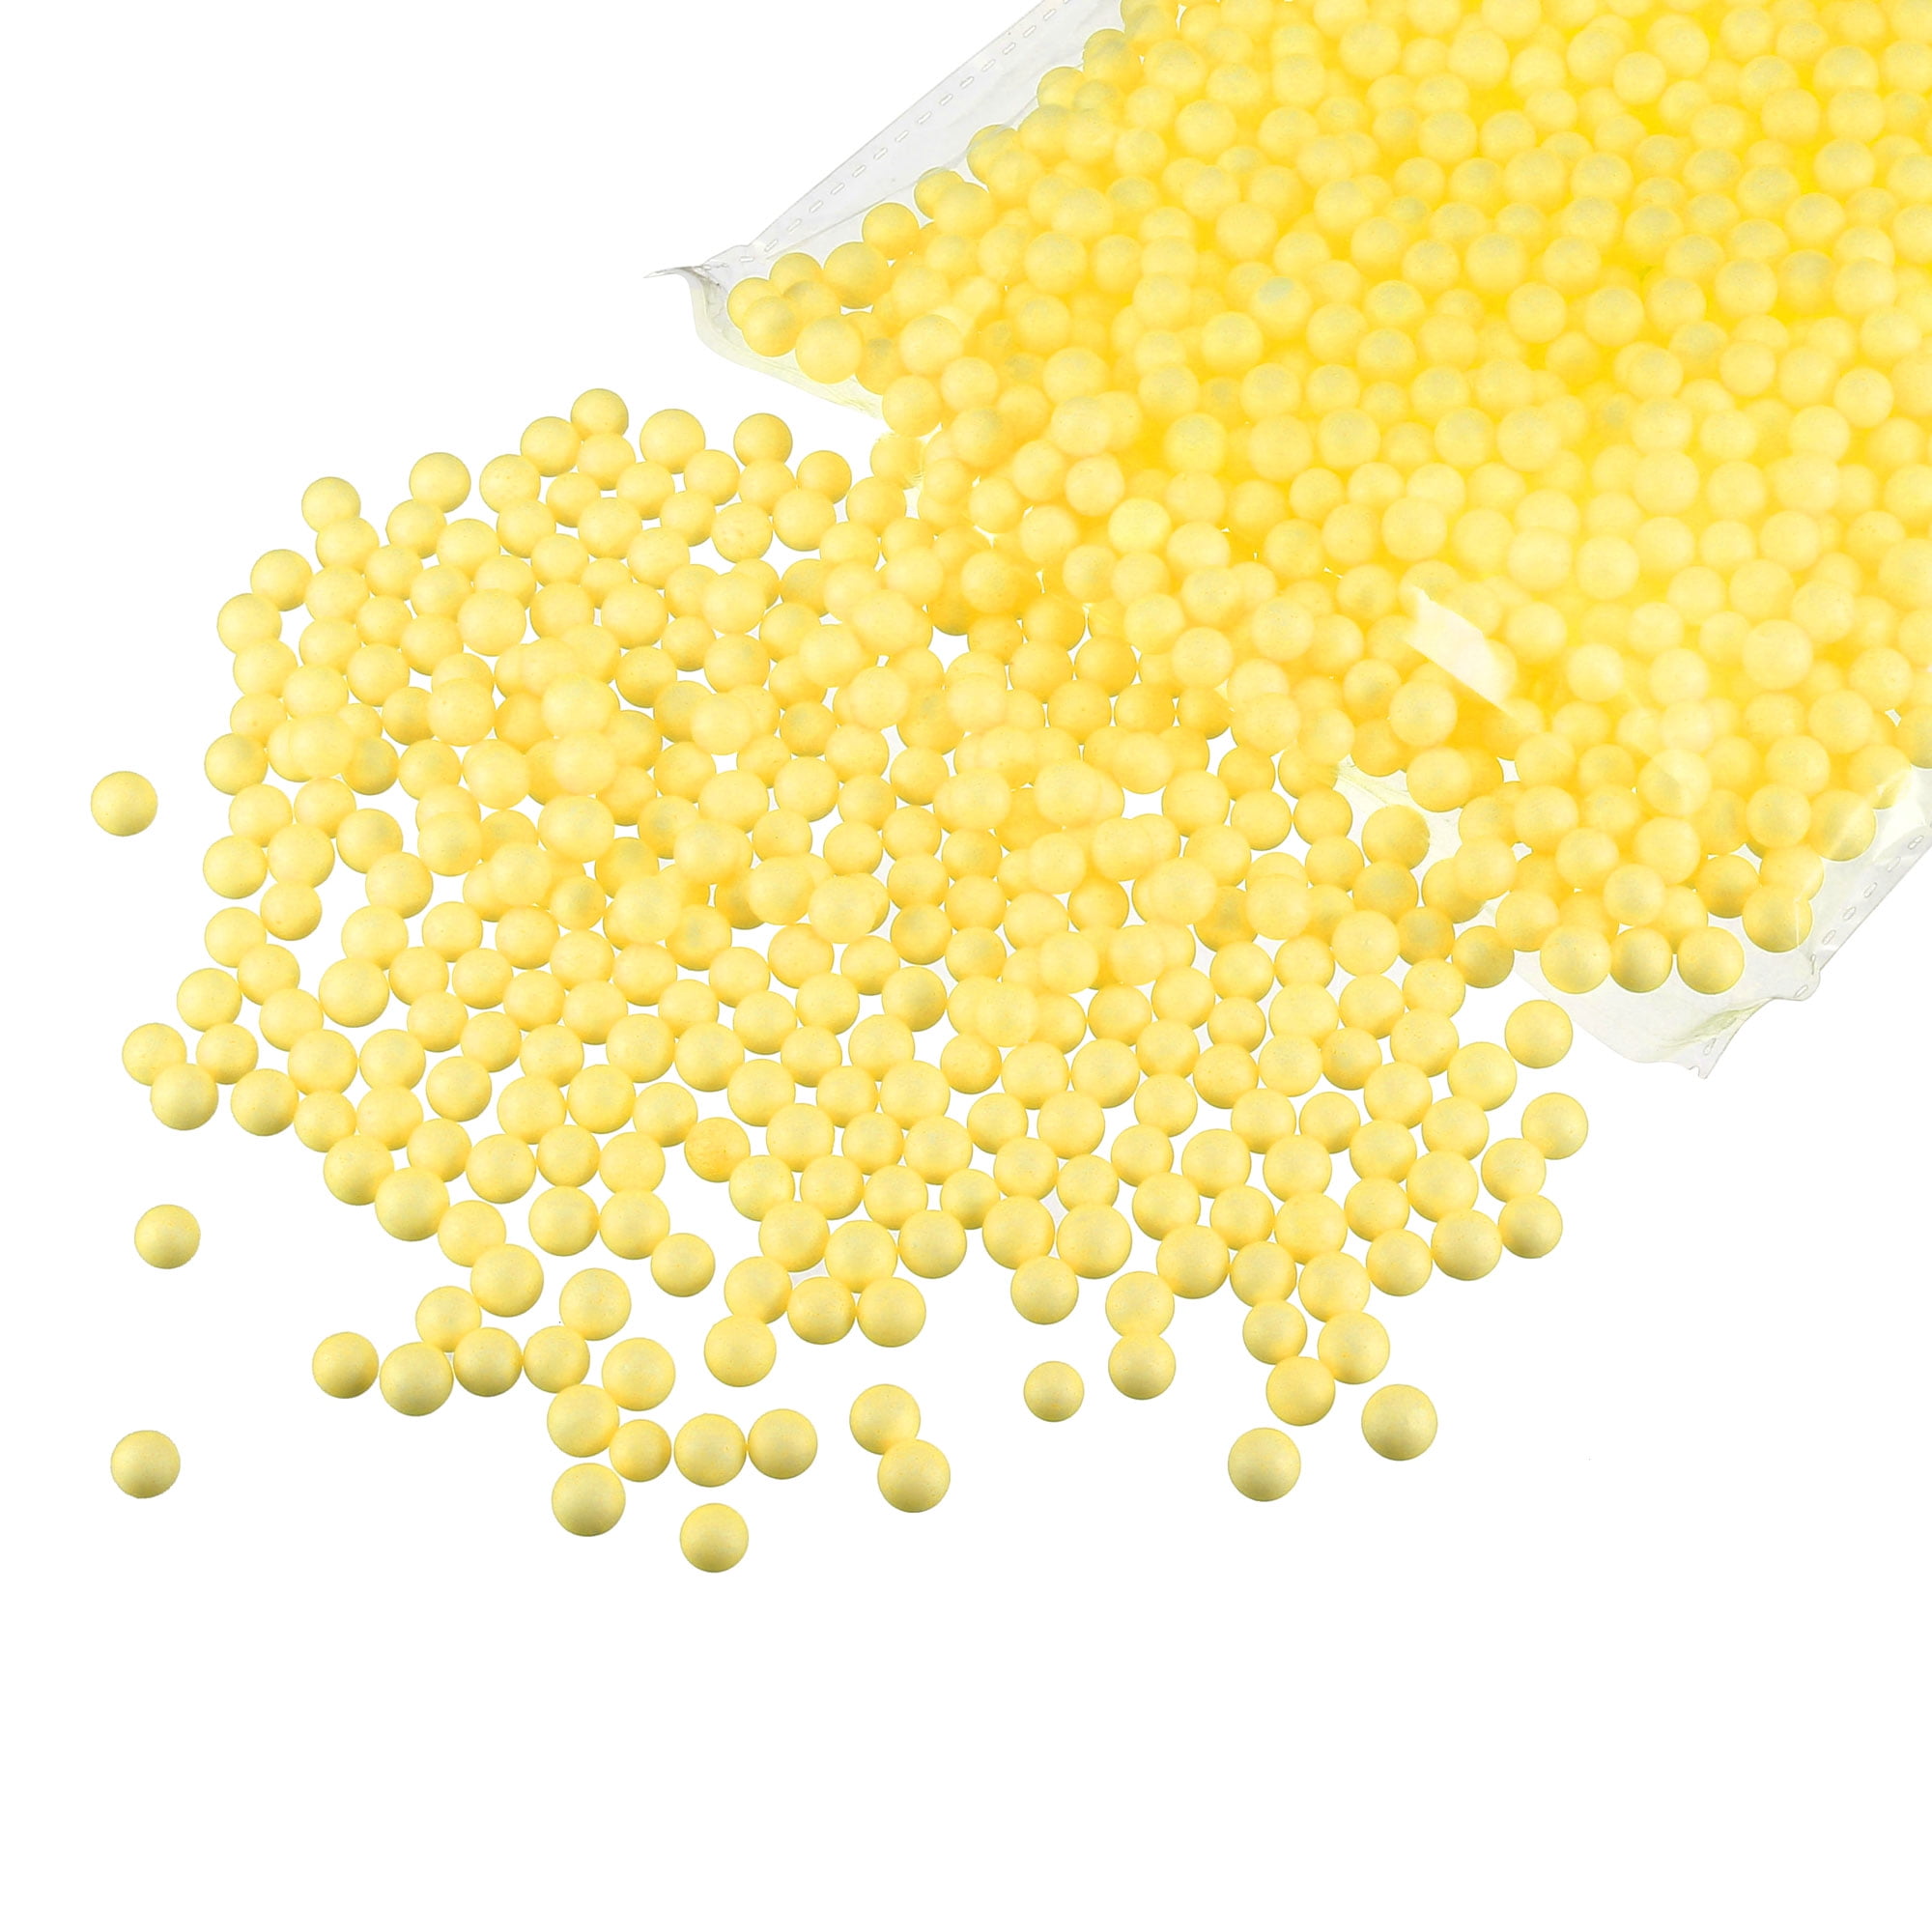 Uxcell 0.1 Light Yellow Mini Polystyrene Foam Beads Ball for Crafts  Fillings 1 Pack